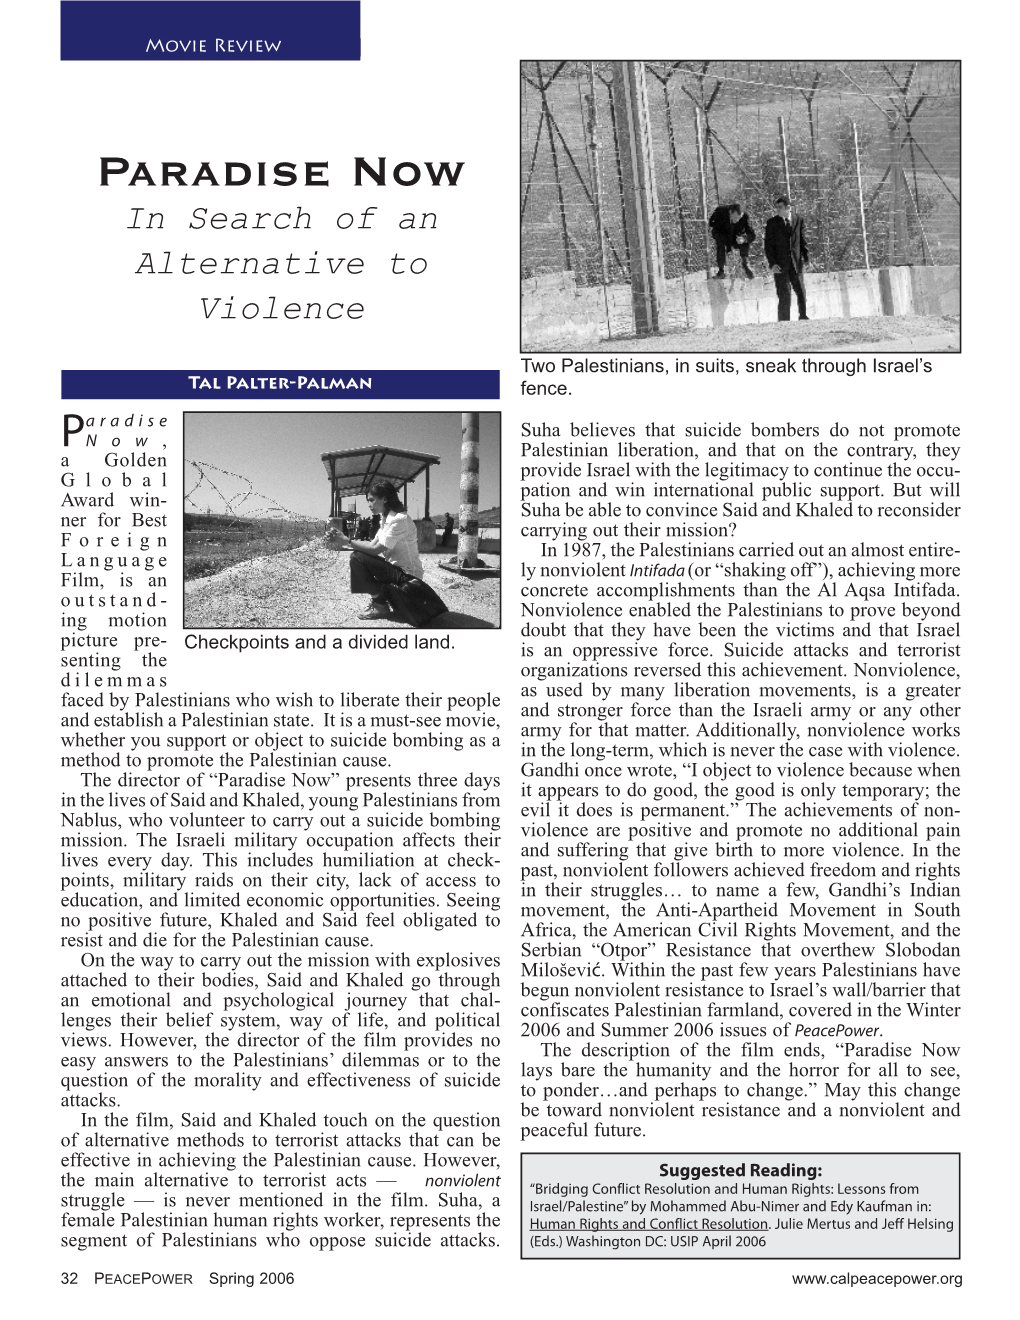 Paradise Now in Search of an Alternative to Violence